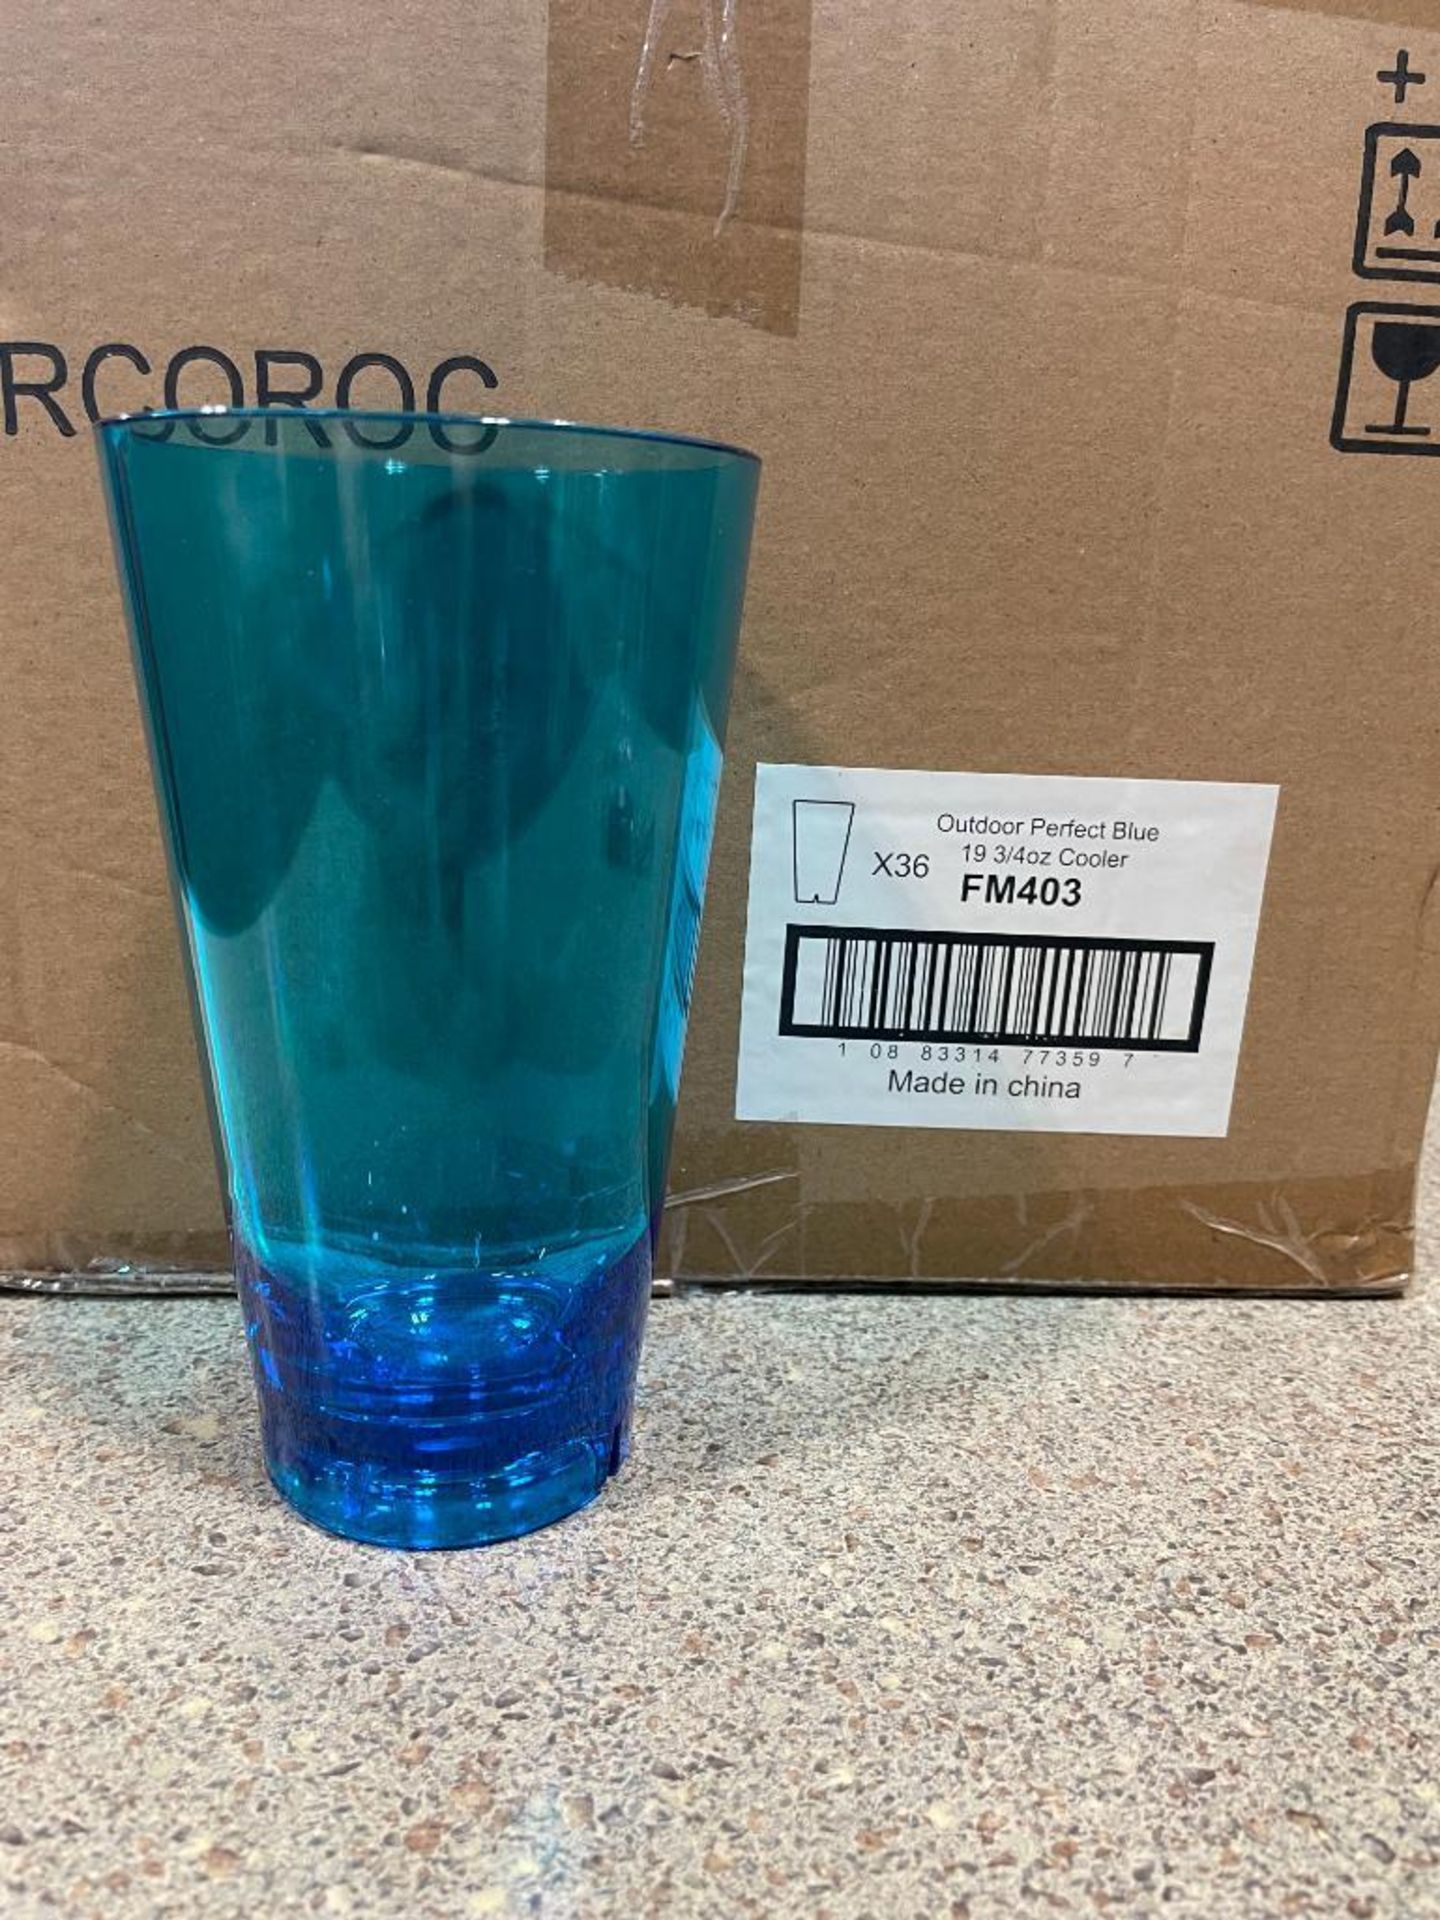 19.75OZ OUTDOOR PERFECT BLUE COOLER GLASSES, ARCOROC FM403 - LOT OF 36 - NEW - Image 9 of 10